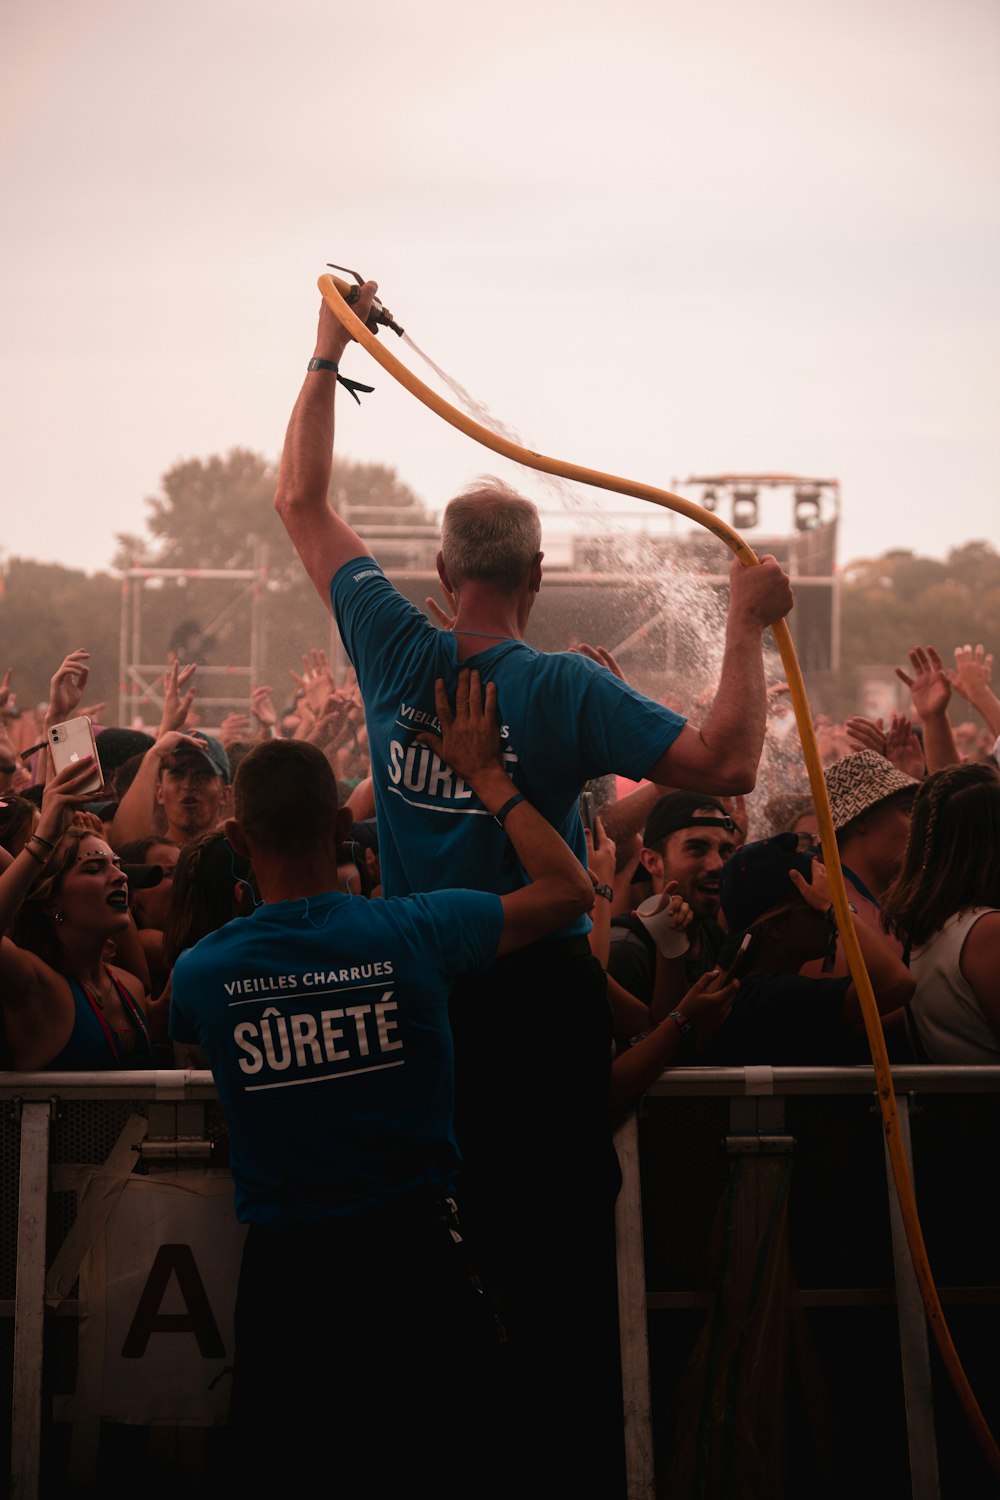 a man holding a stick in front of a crowd